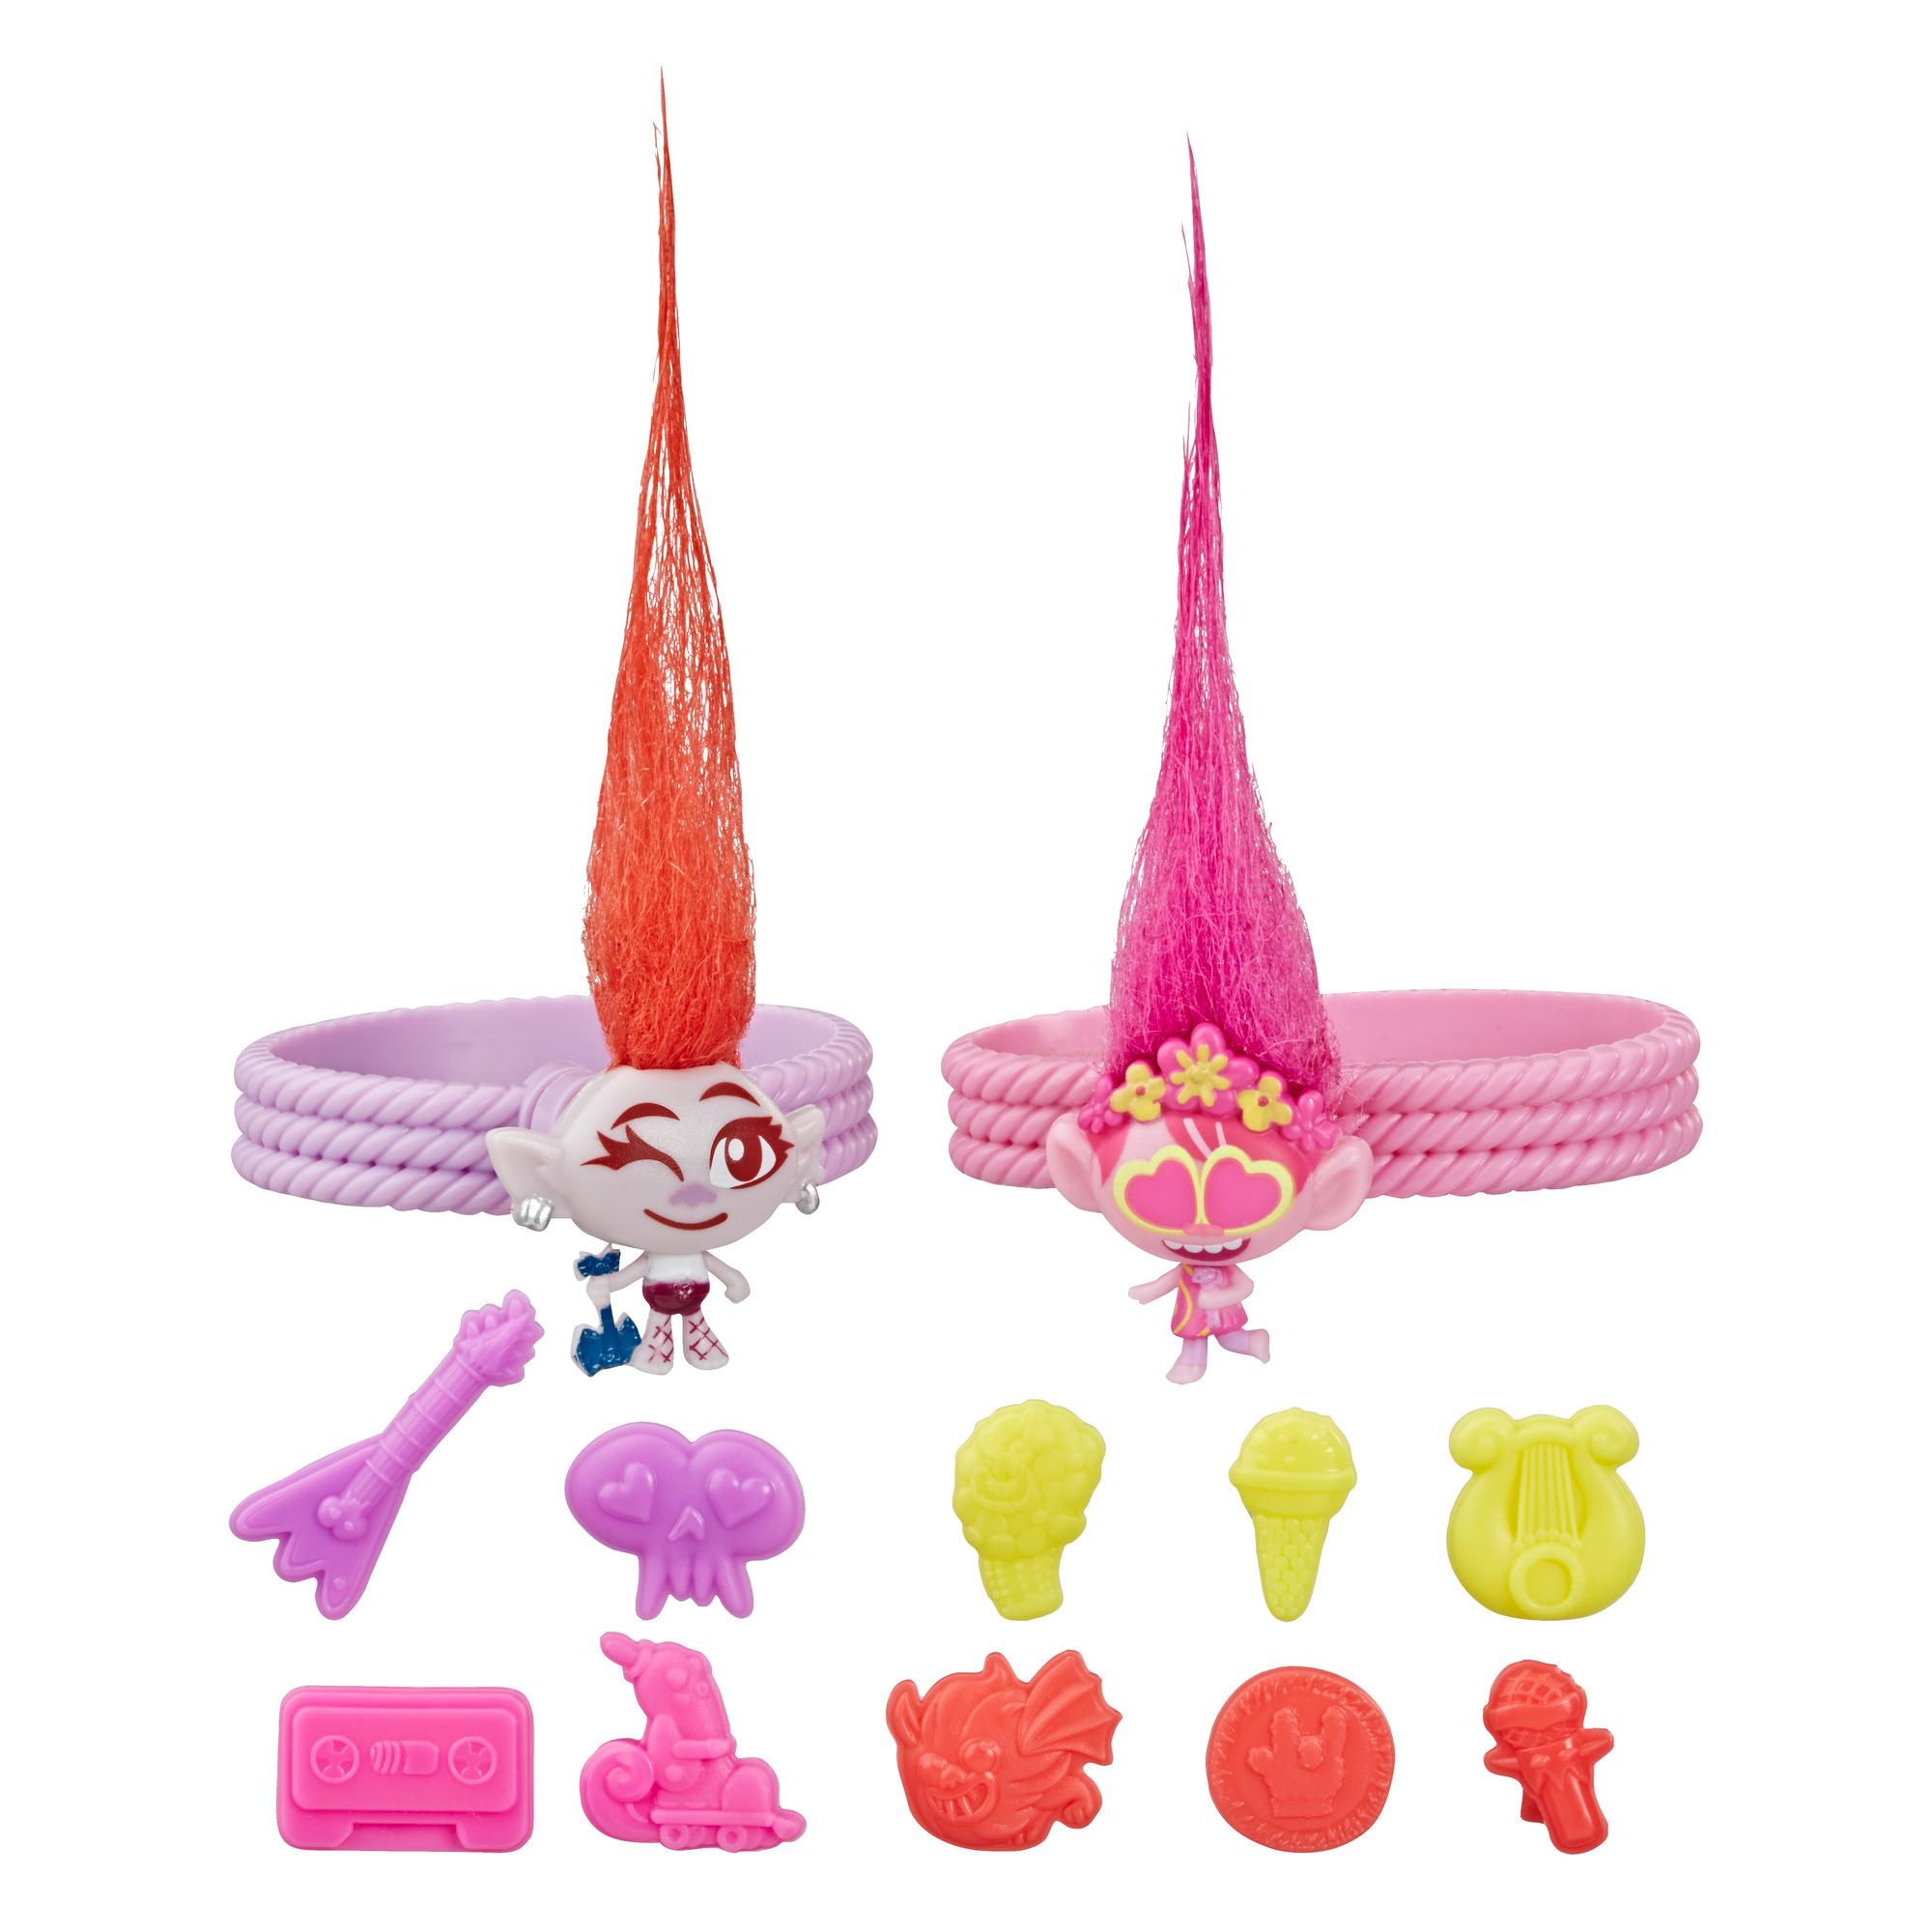 DreamWorks Trolls Tiny Dancers Friend Pack with 2 Tiny Dancers Figures, 2 bracelets, and 10 Charms, Inspired by the Movie Trolls World Tour